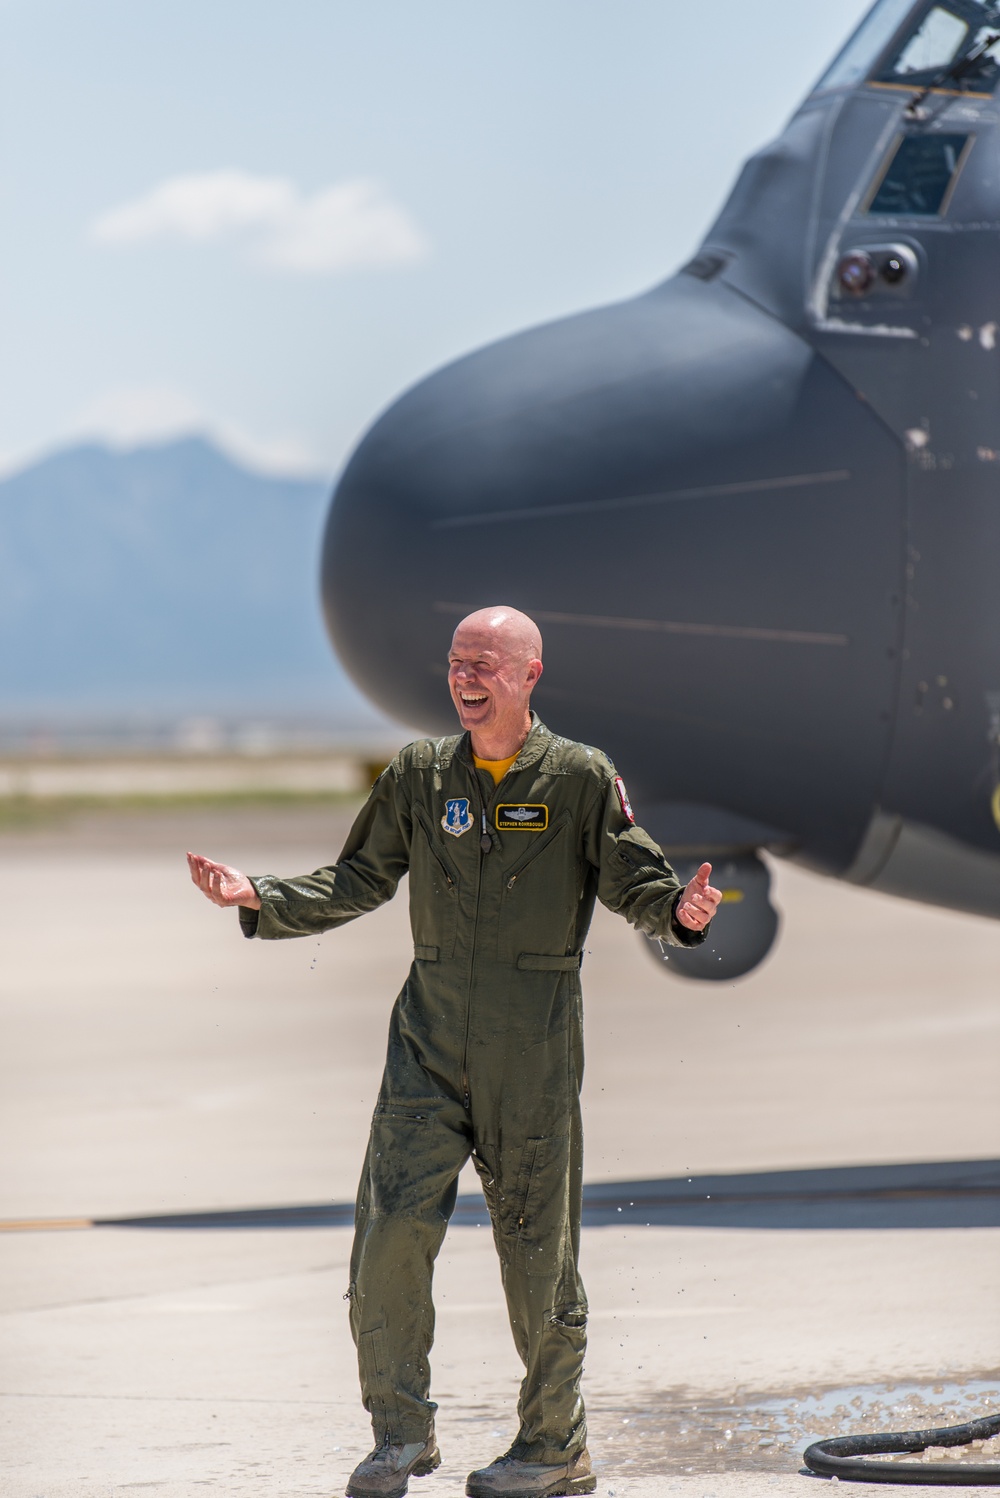 Lt. Col. Stephen Rohrbough Completes His Final Flight Before Retirement From the Air National Guard